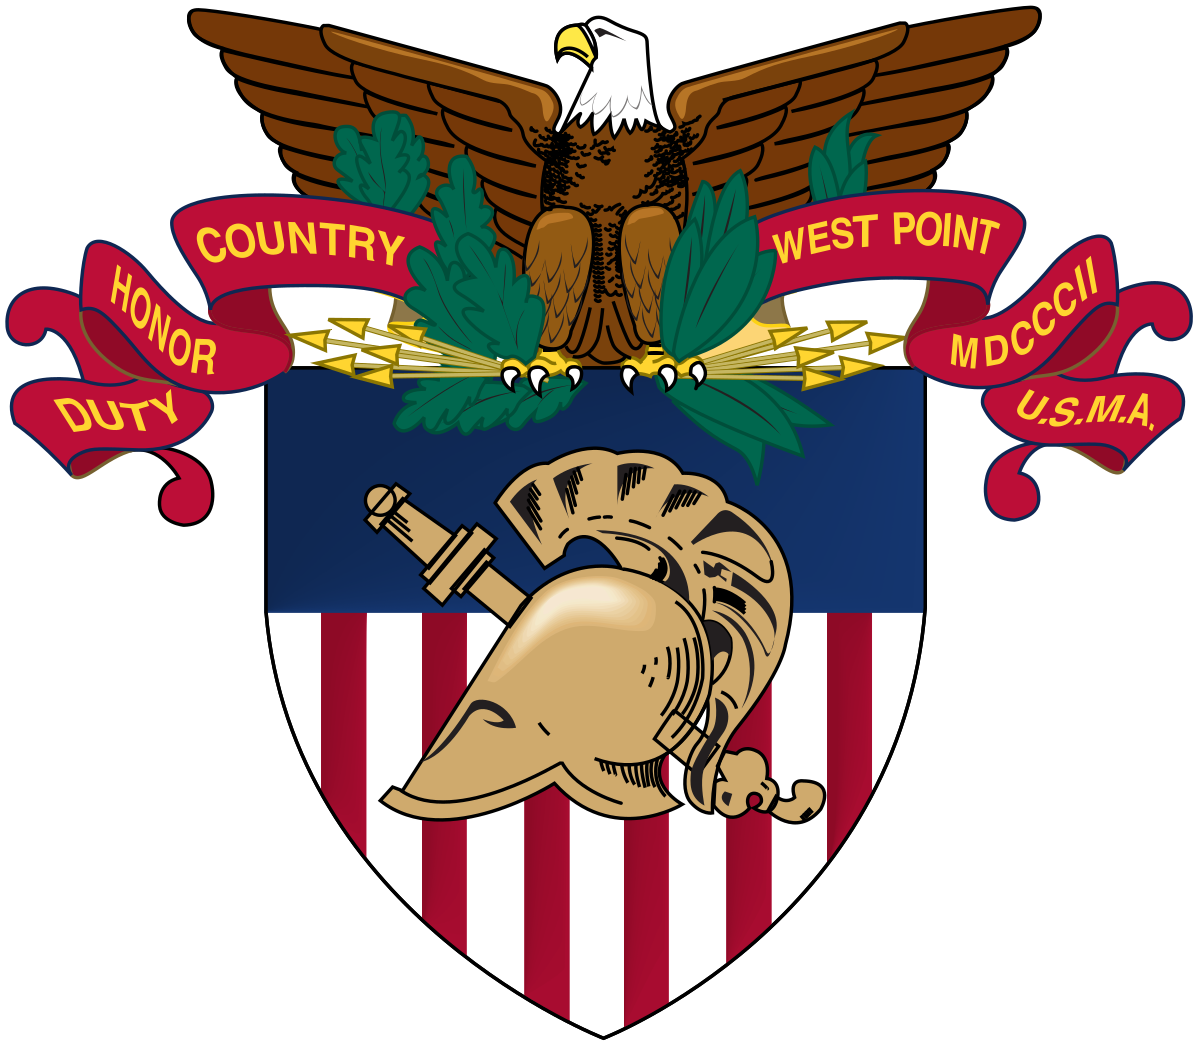 United States Military Academy.